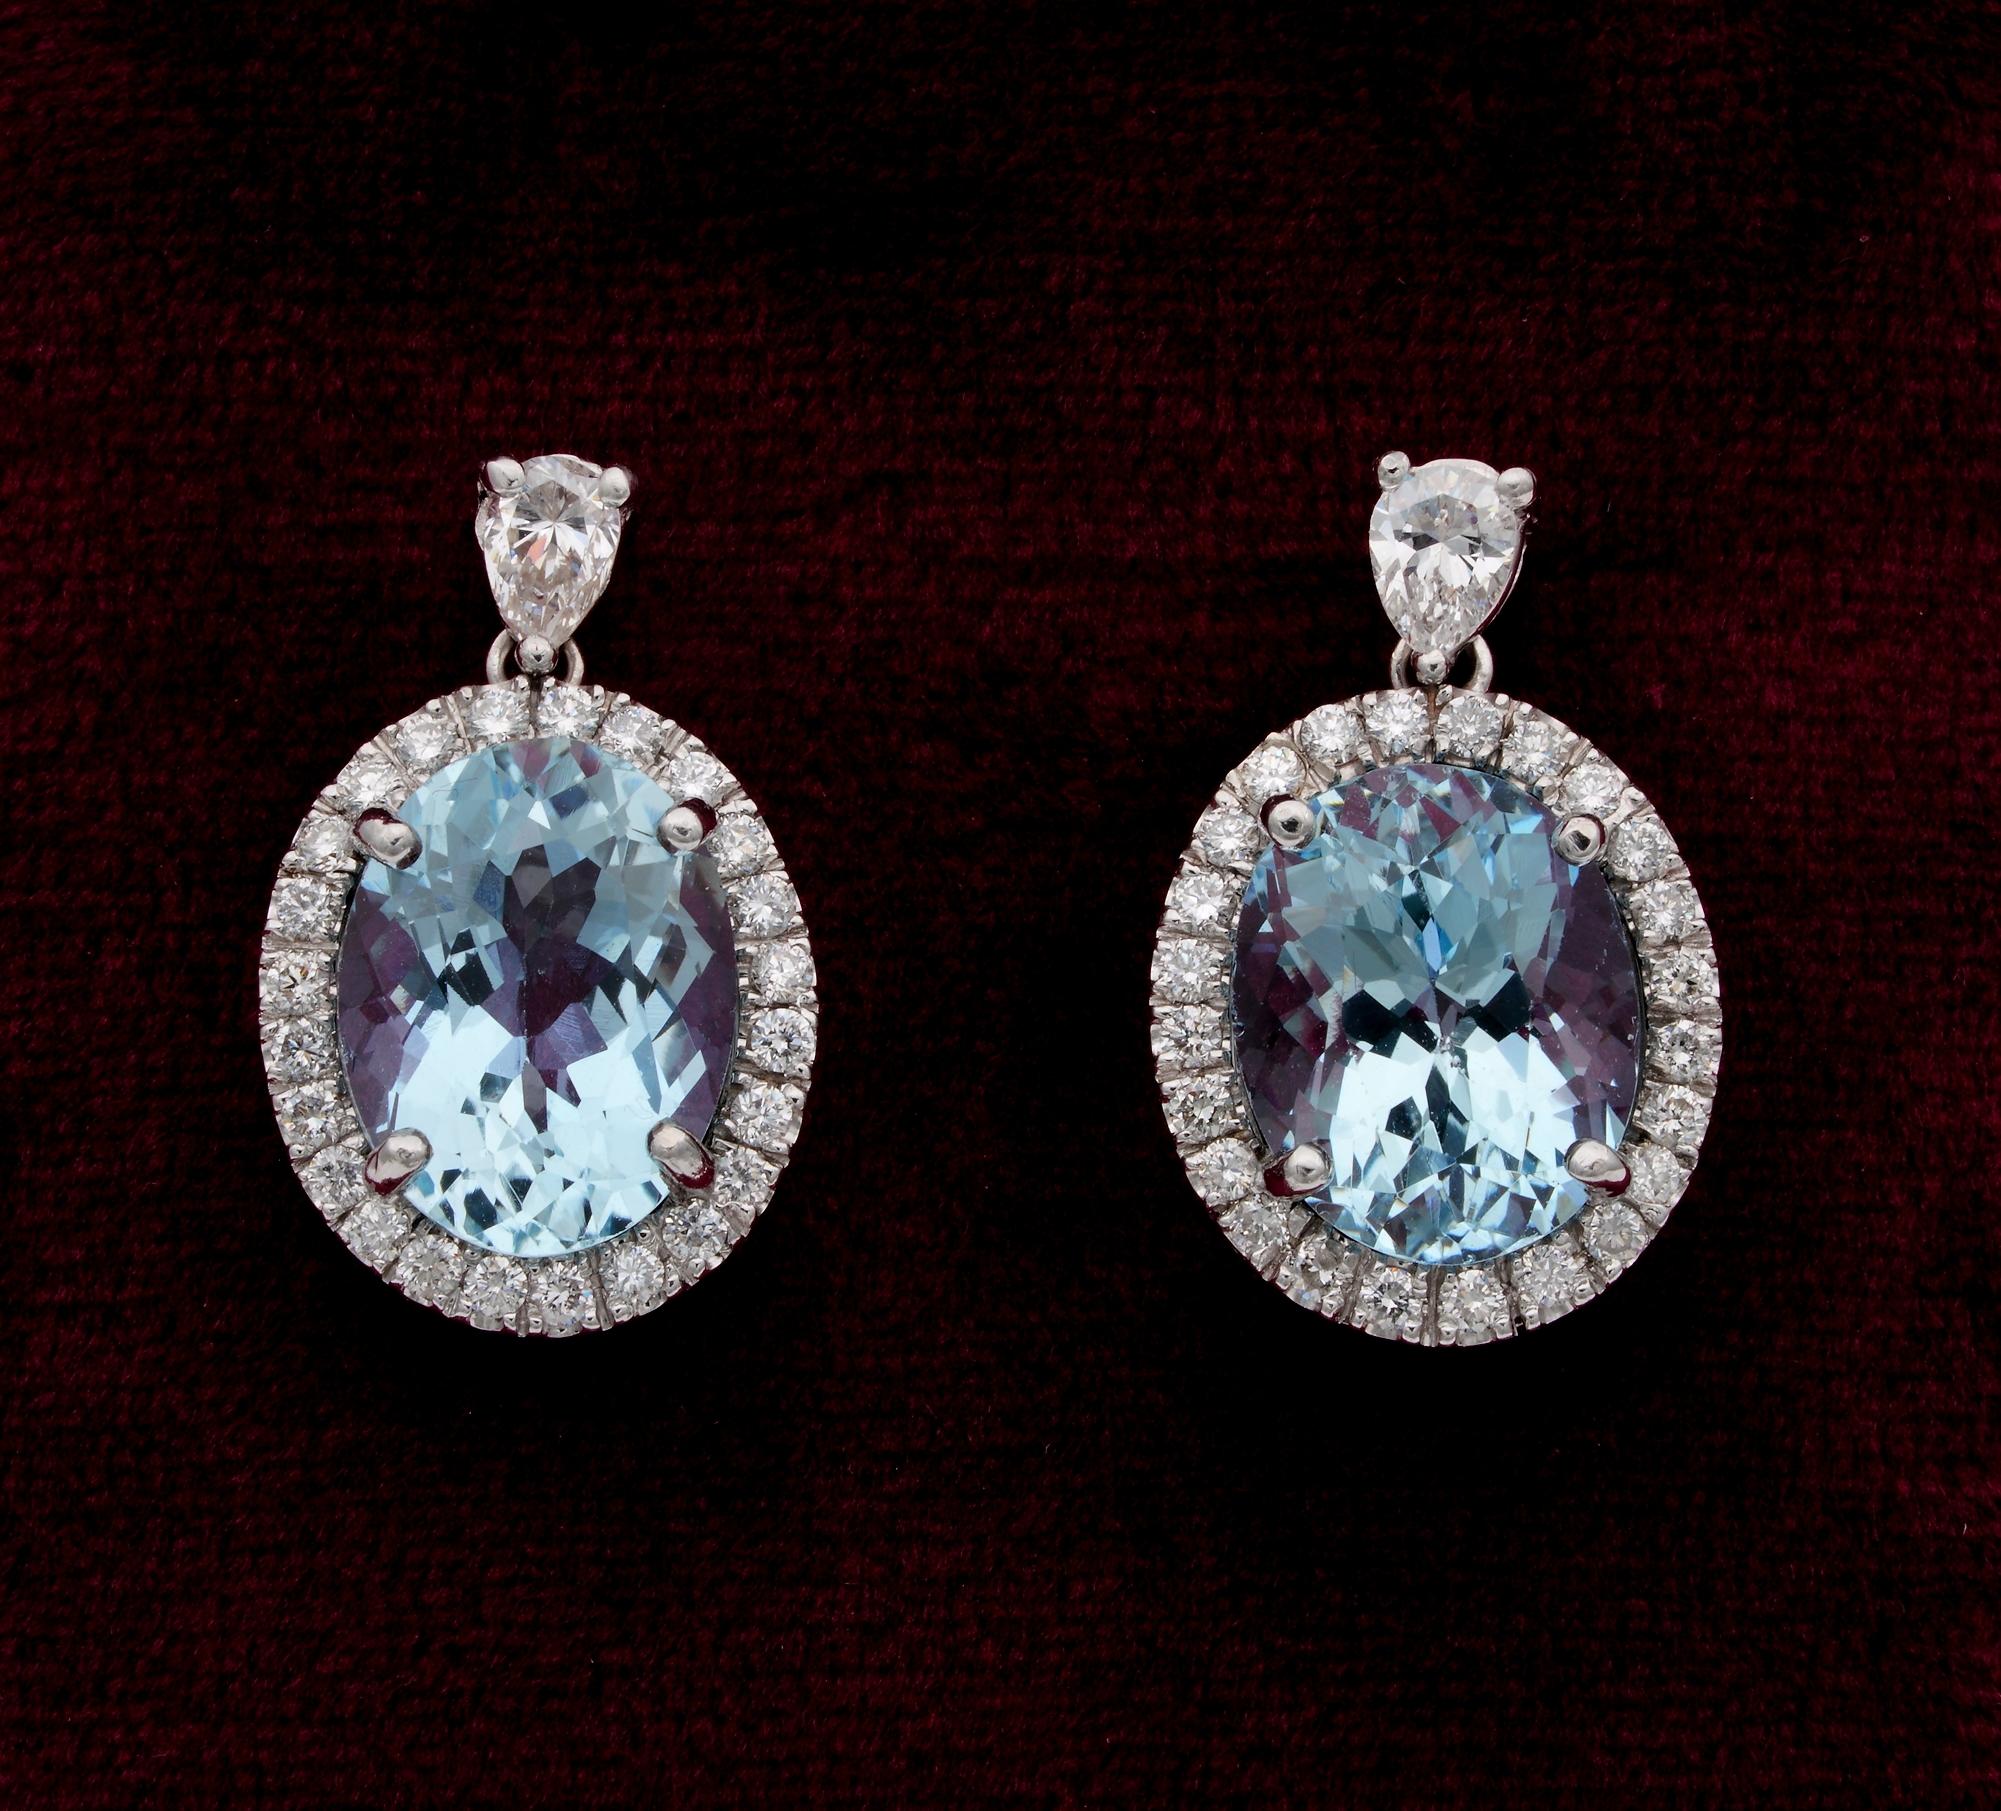 1960 ca, classy pair of Aquamarine and Diamond drop earrings
Perfect for all day long
Simple yet effective design hand crafted of solid 18 KT white gold, tested
Set with centre Natural Aquamarine of bright sky Blue Colour full of inner life, each of